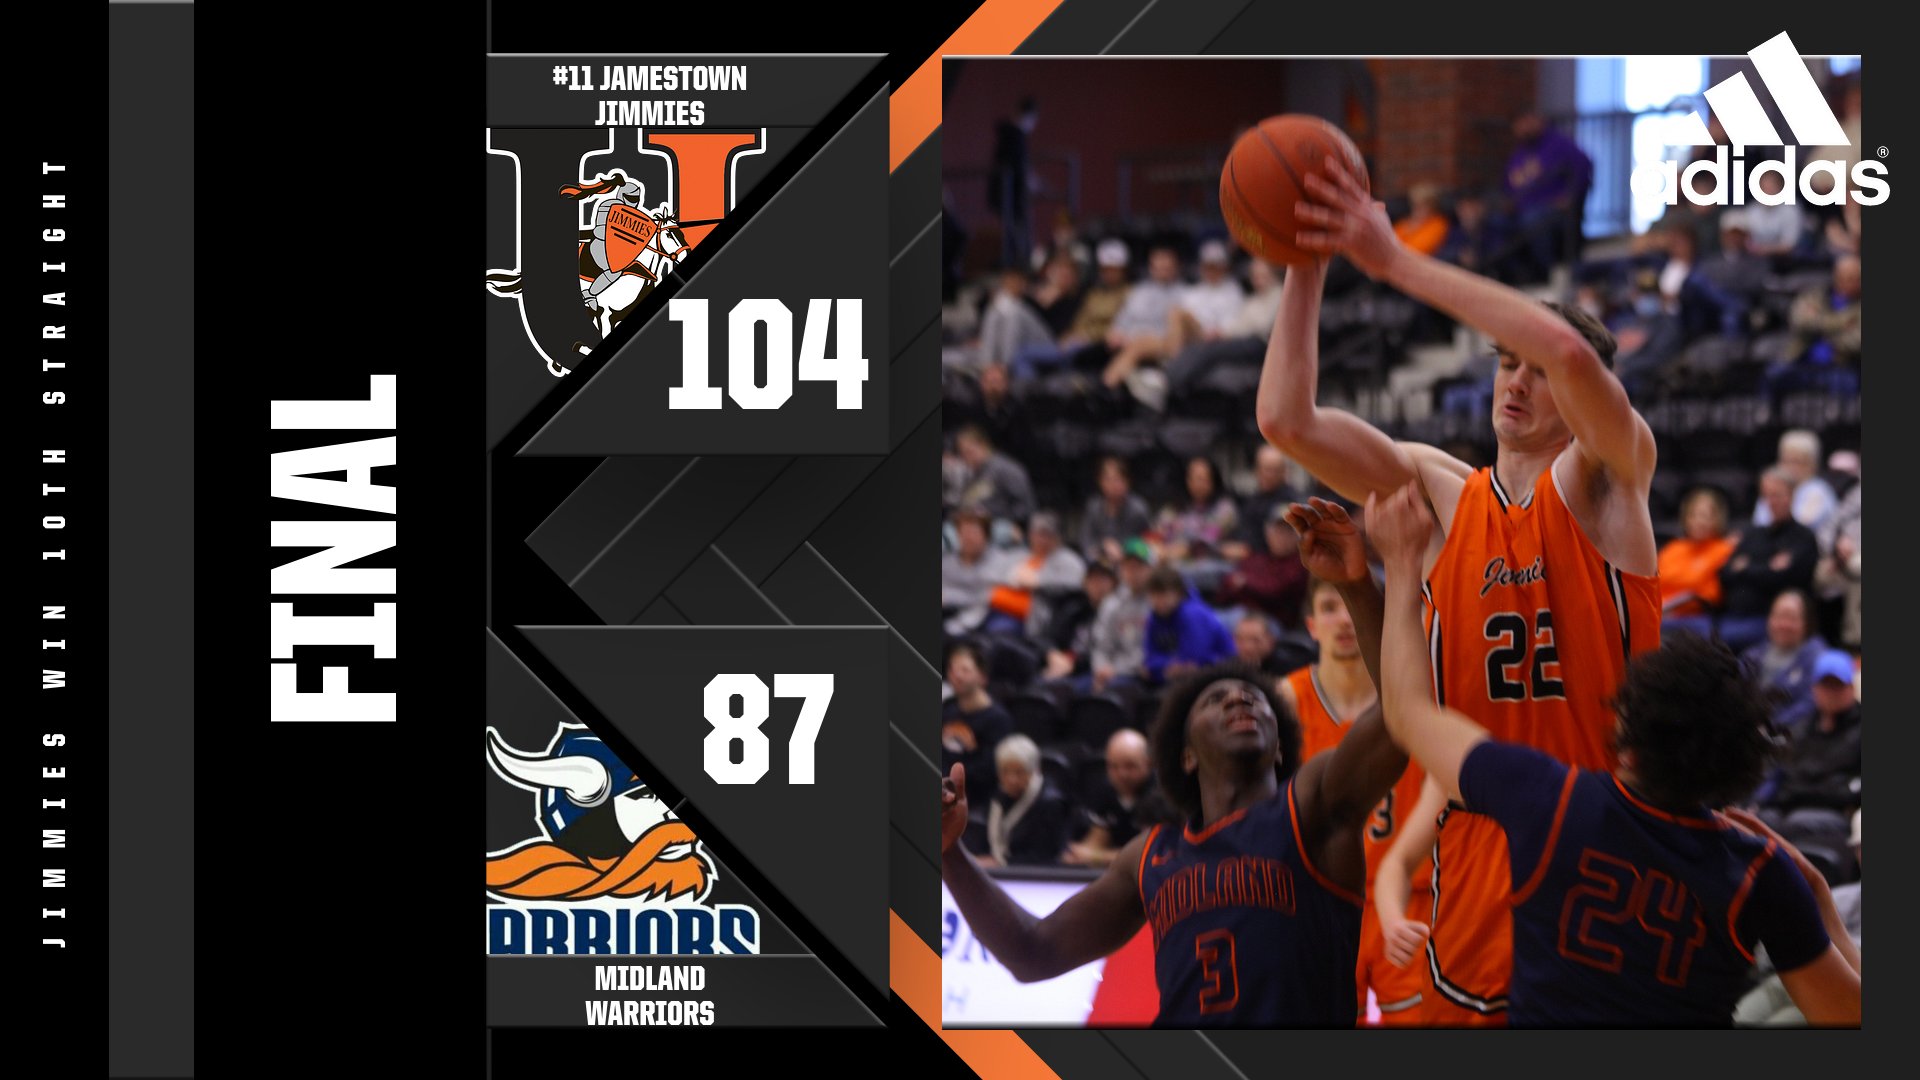 #11 Jimmies hit triple digits in win over Midland